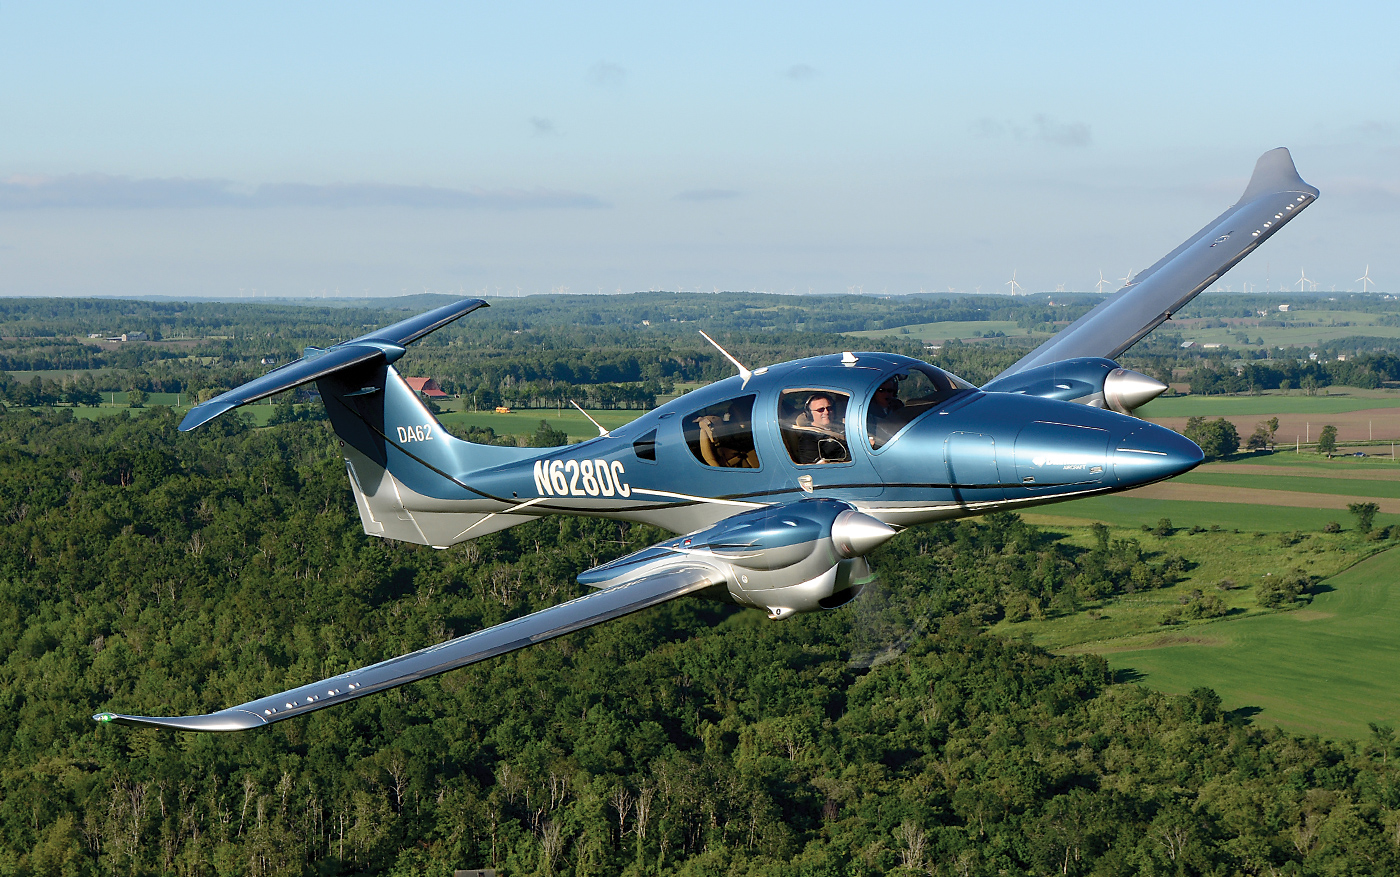 Diamond Aircraft’s new all-composite DA62 fits a myriad of missions: twin-engine trainer, charter aircraft, corporate shuttle and personal transport. Production is being transferred from Diamond Austria to the plant in London, Ont., with the Canadian branch converting the type certificate to Transport Canada authority, a process it hopes to conclude by mid-November 2017. Photos by Eric Dumigan